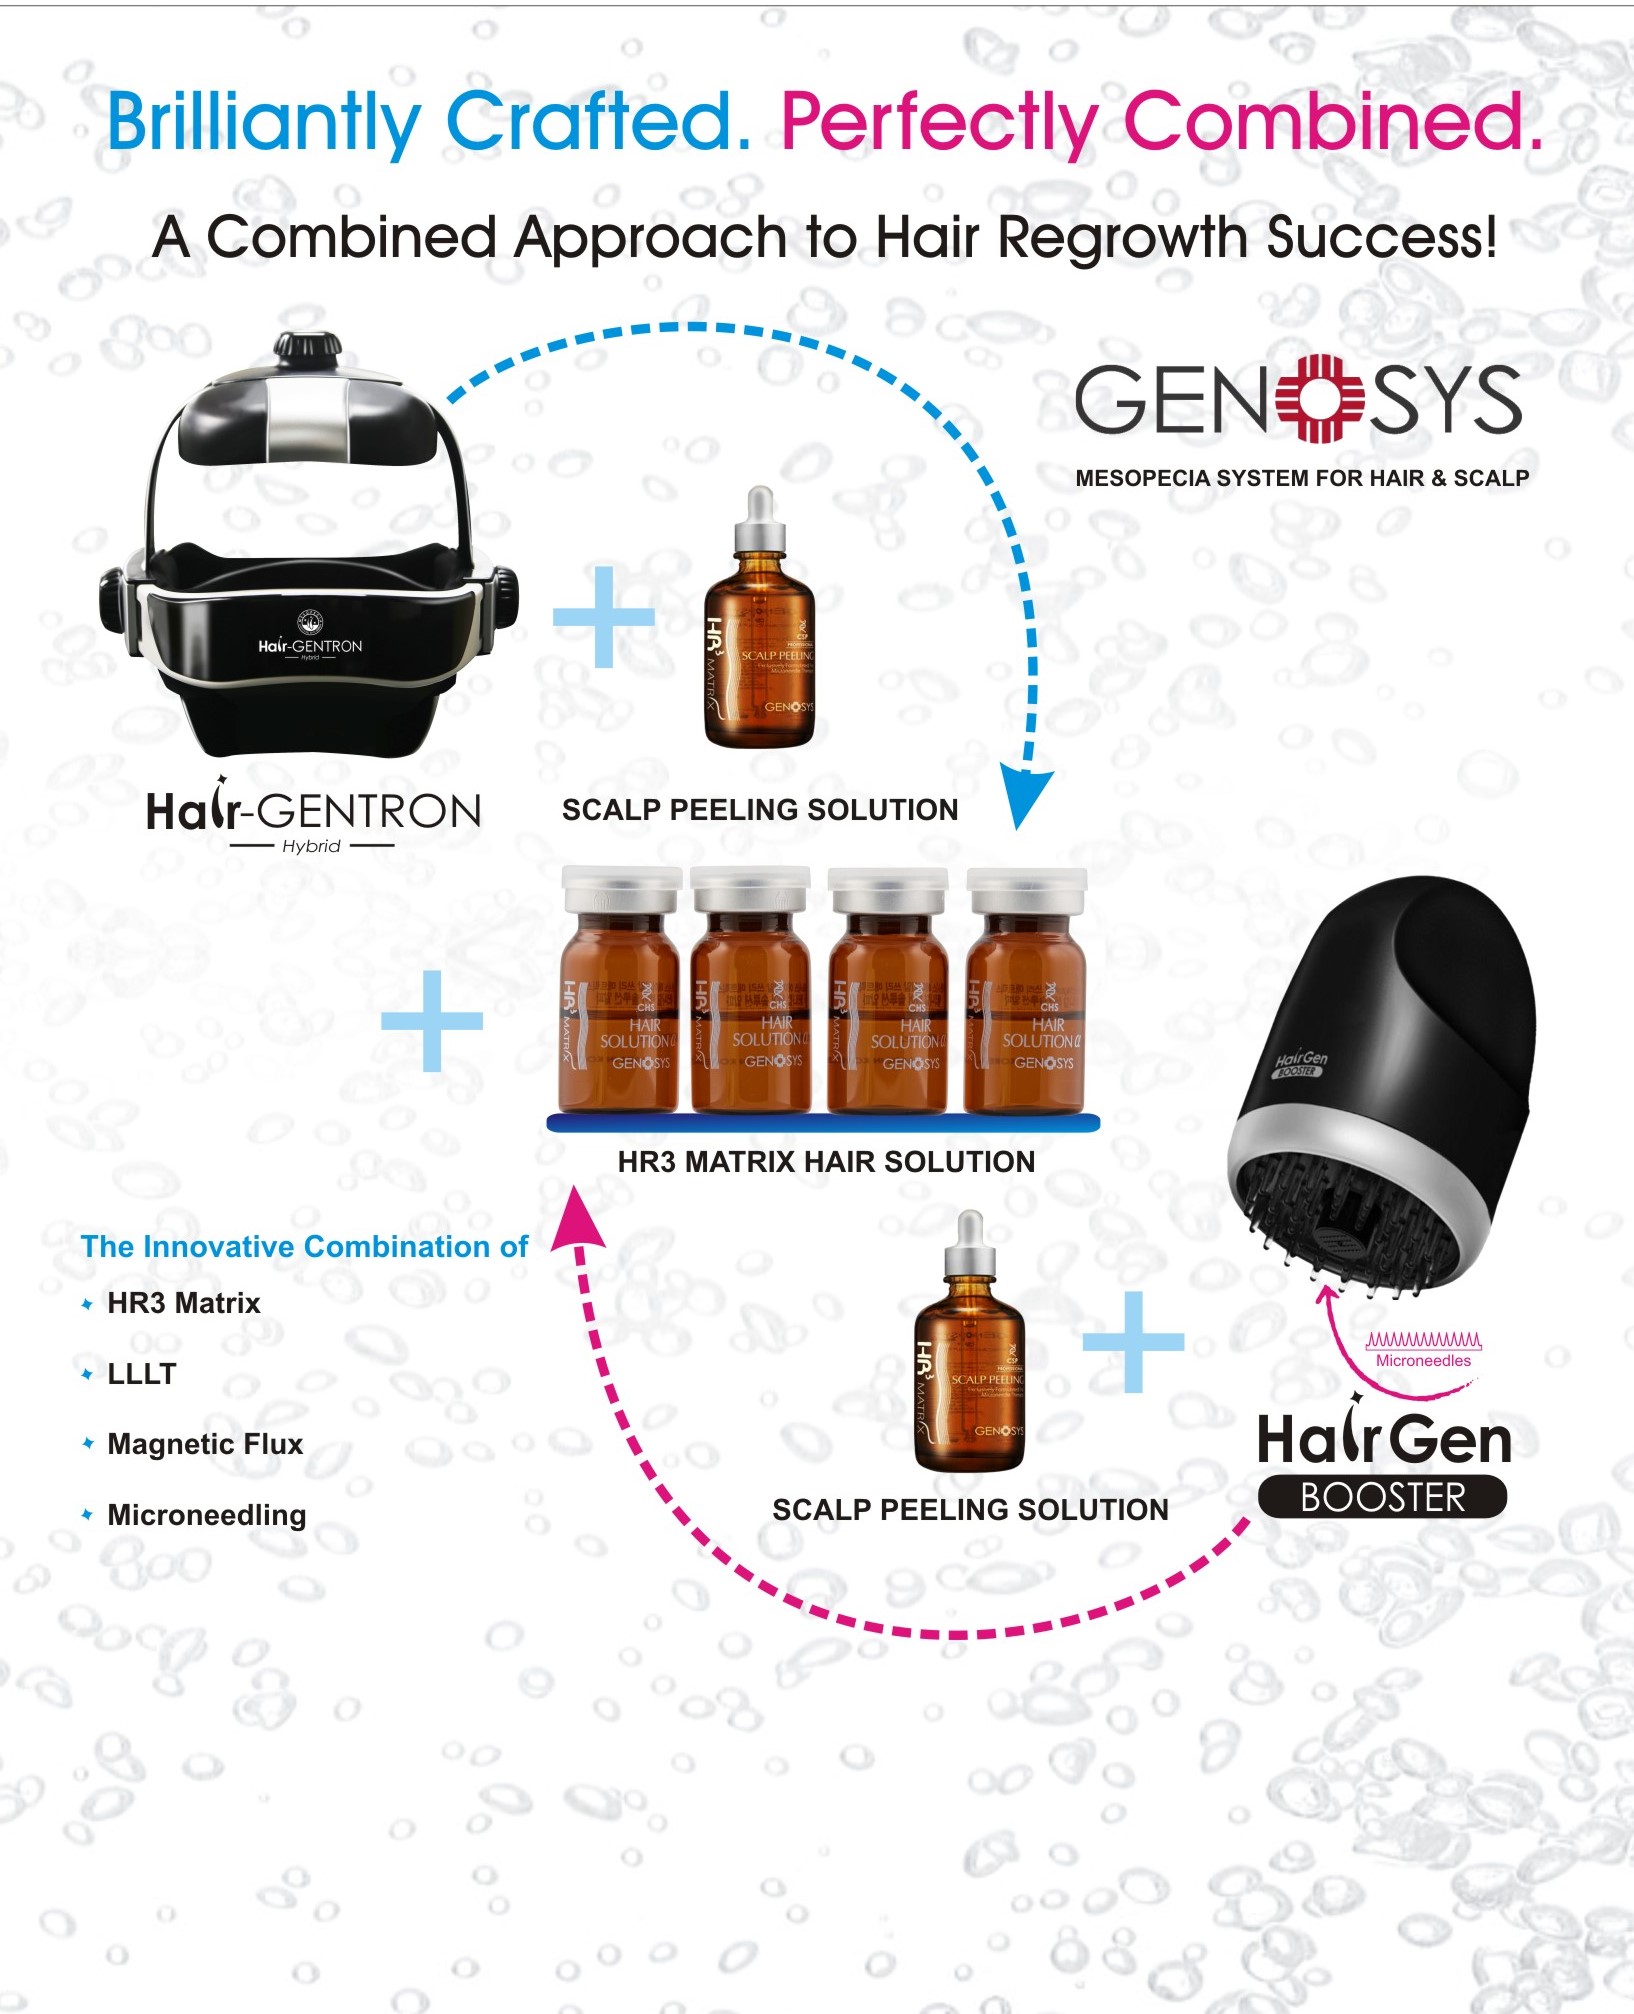 hairgen-booster-treatment-protocol.jpg